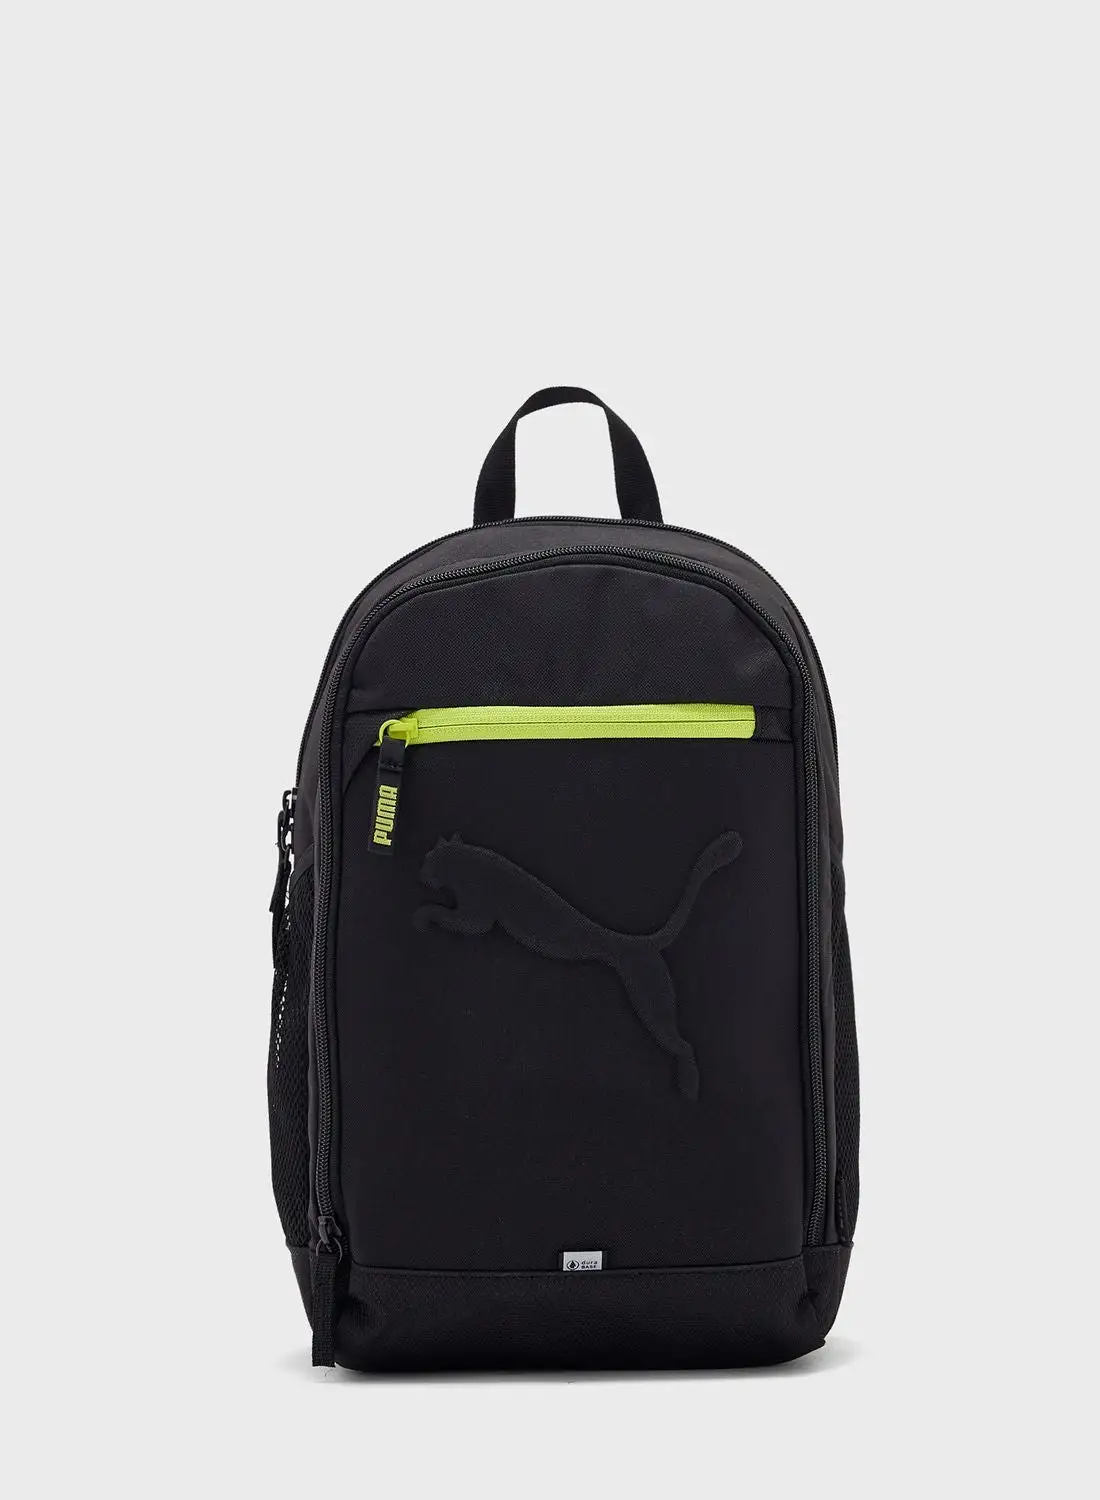 PUMA Buzz Youth Backpack